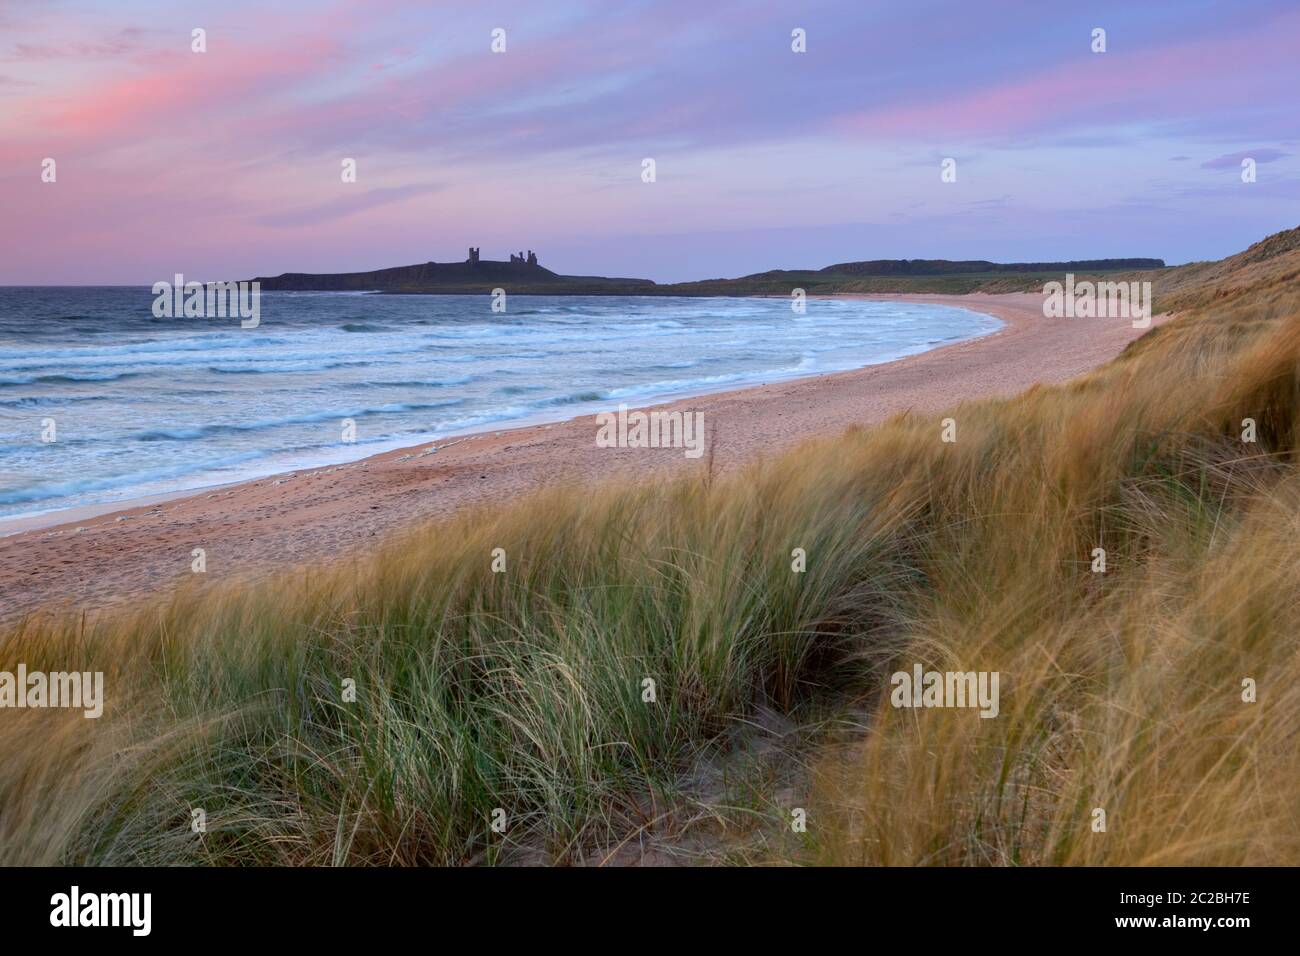 Sunrise over Embleton Bay and the ruins of medieval Dunstanburgh Castle, Alnwick, Northumberland, England, United Kingdom, Europe Stock Photo